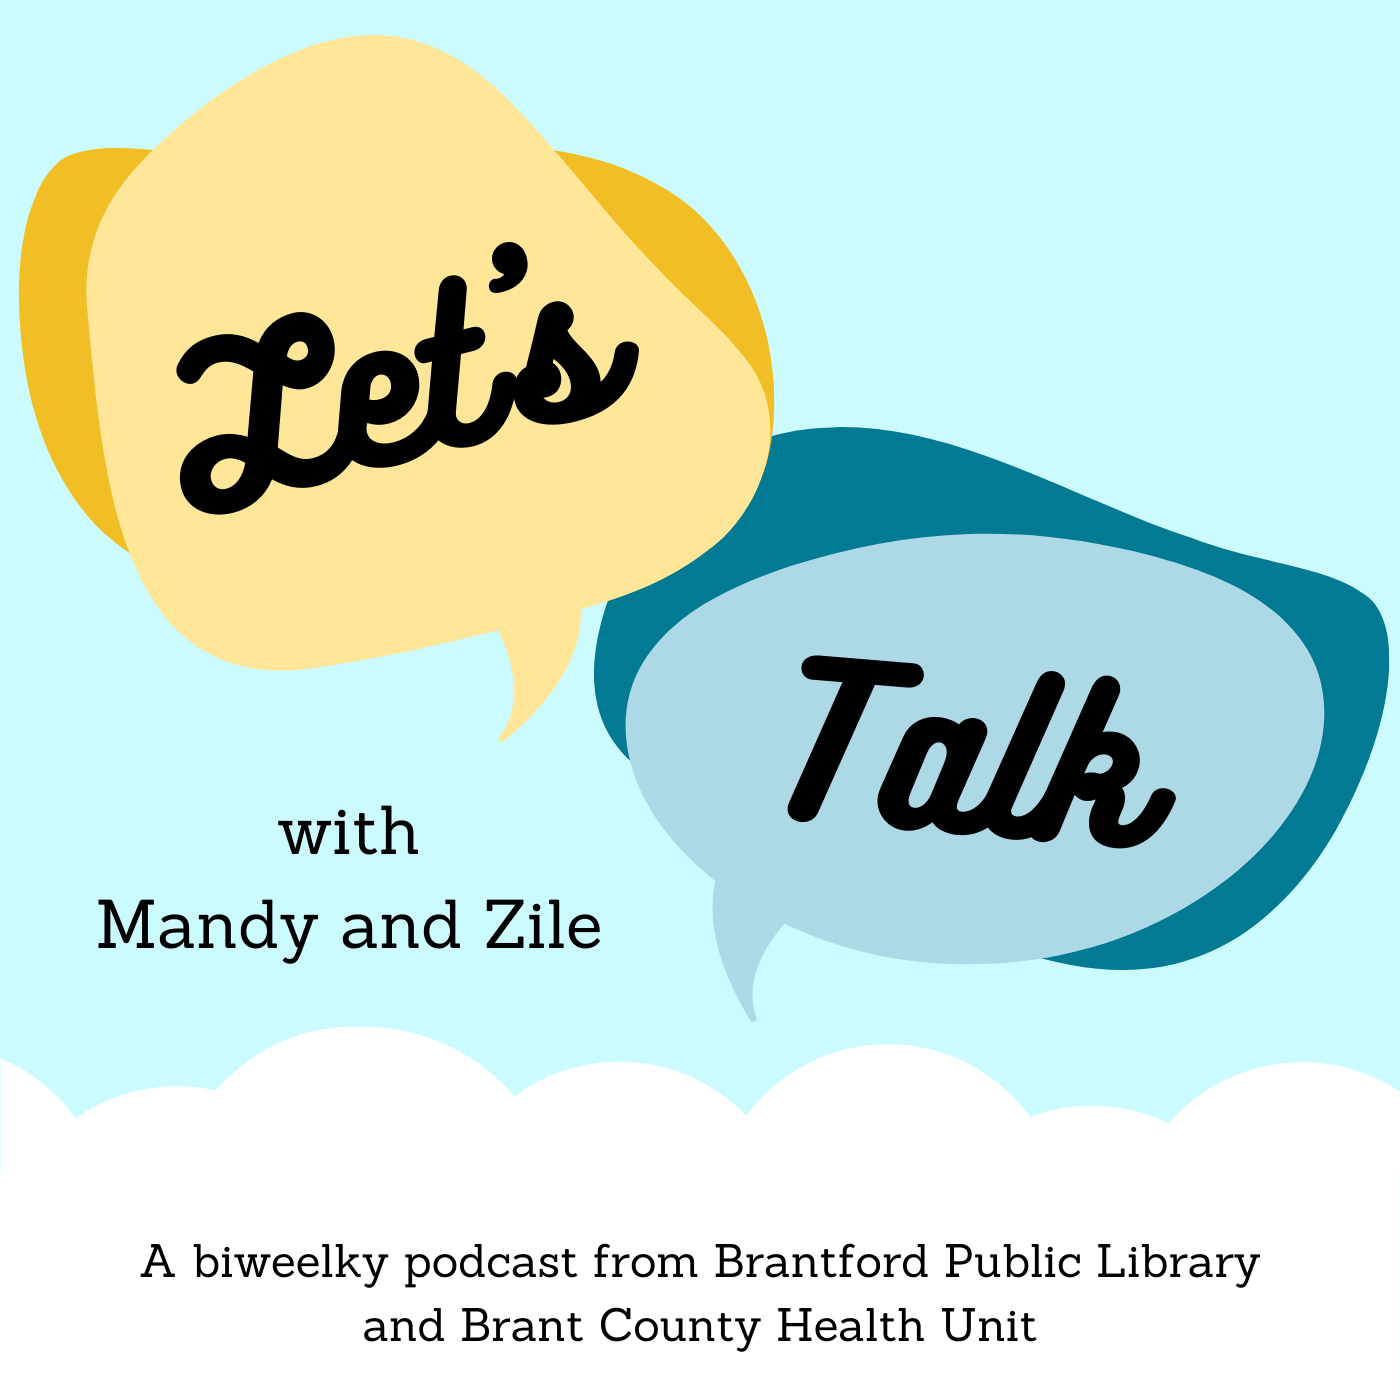 Let's Talk with Mandy and Zile